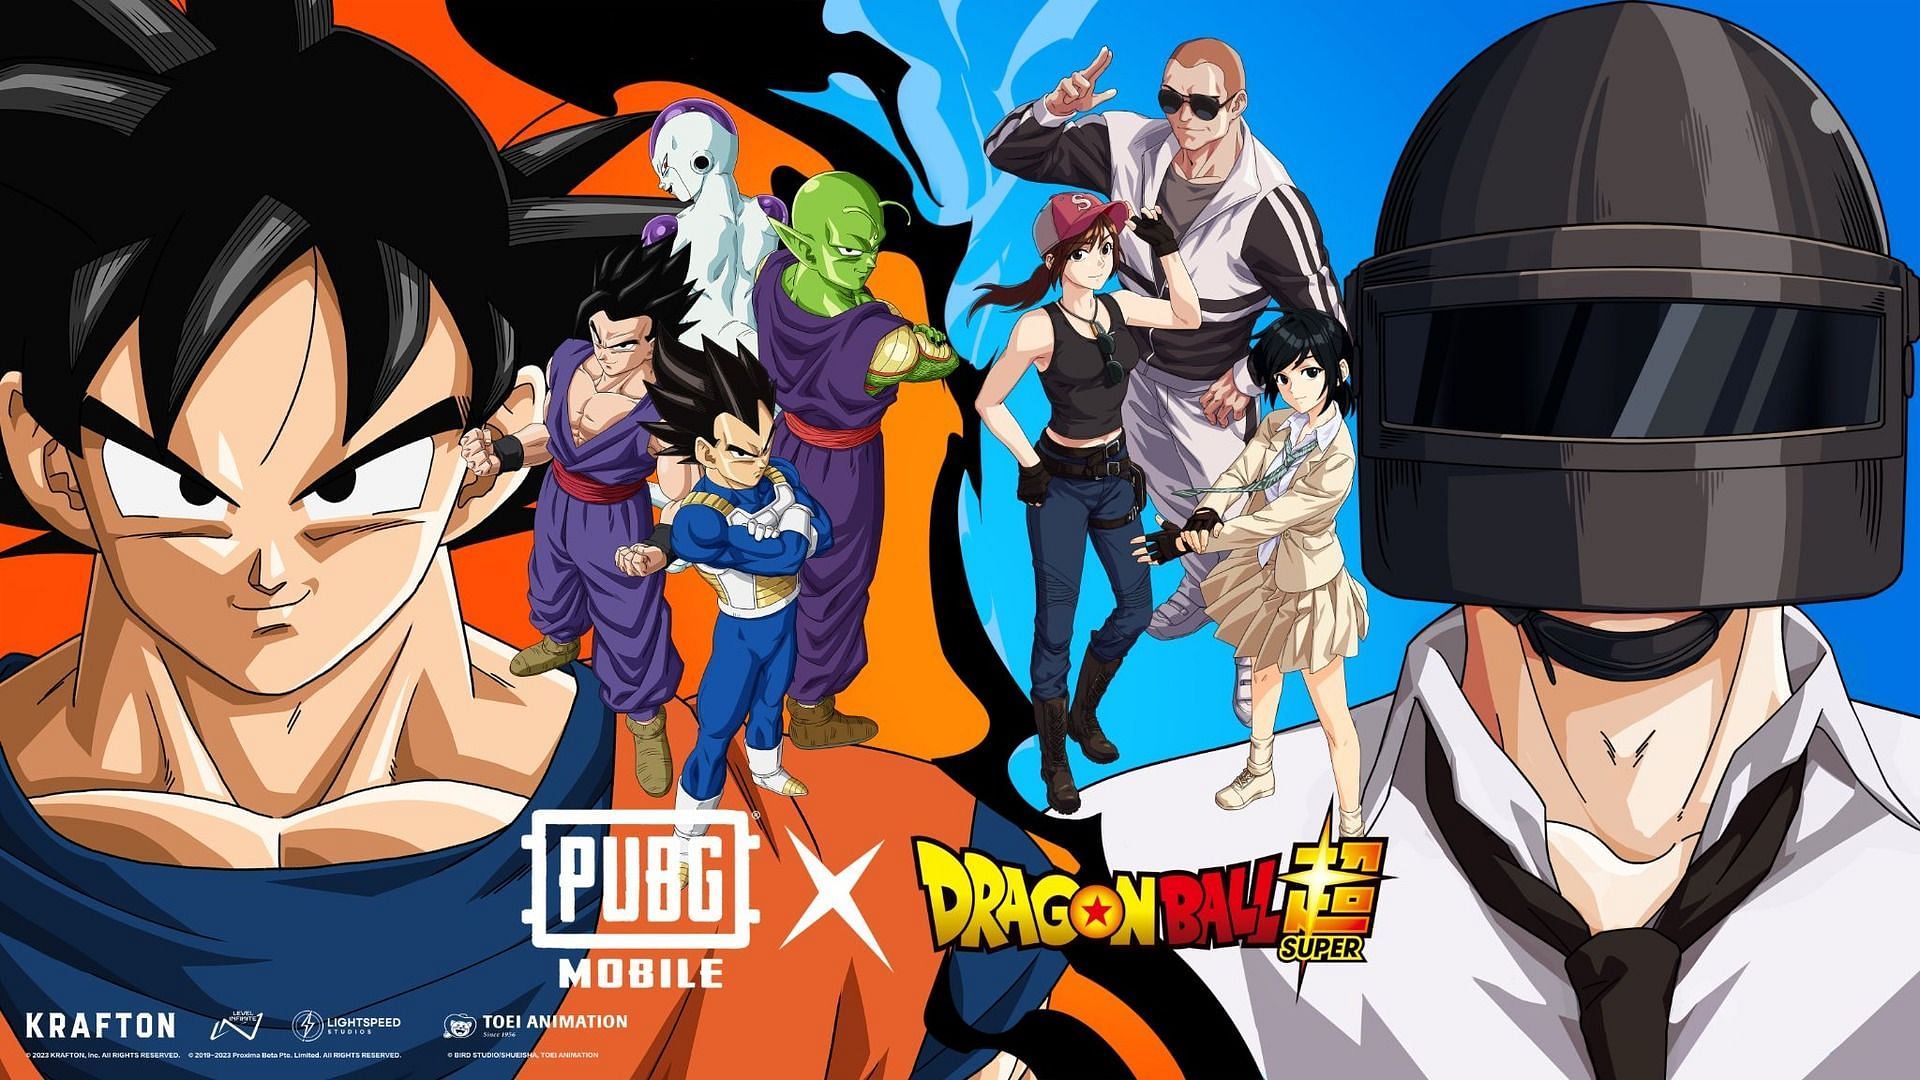 PUBG Mobile x Dragon Ball Super collaboration is here! (Image via Tencent Games)